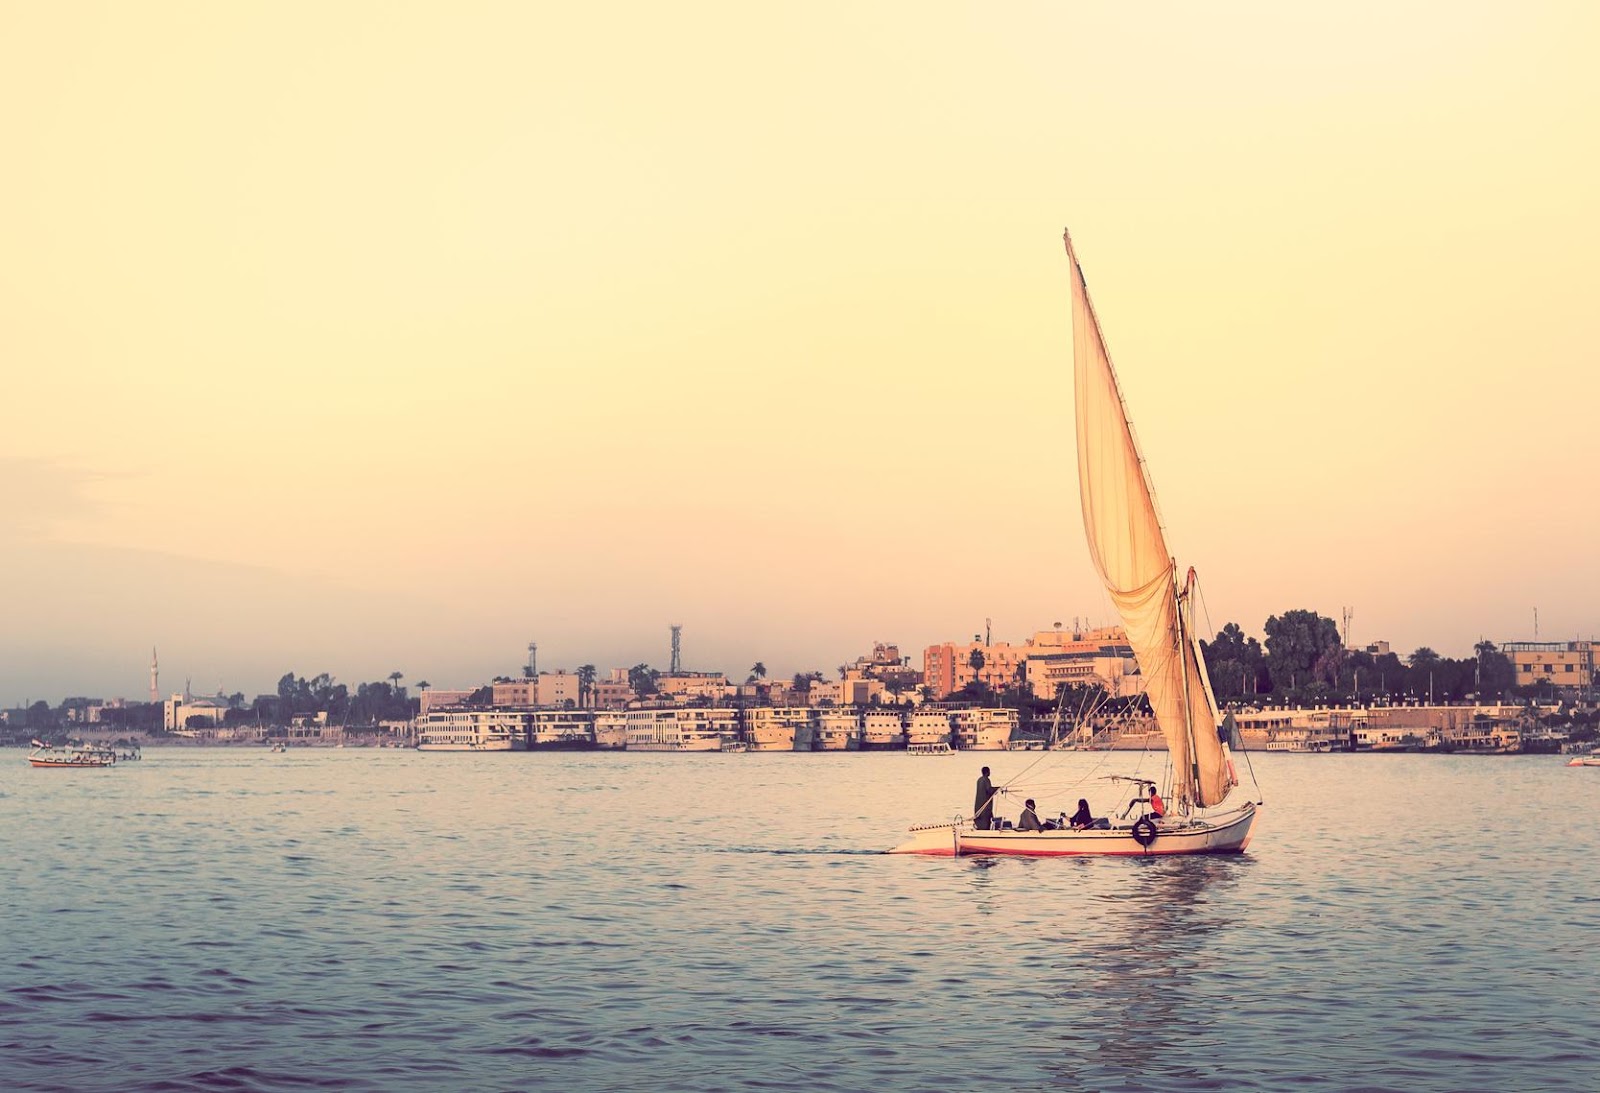 Egypt invites you to discover the majestic Nile and its lush delta, its splendid monuments, its bewitching desert, its rich history